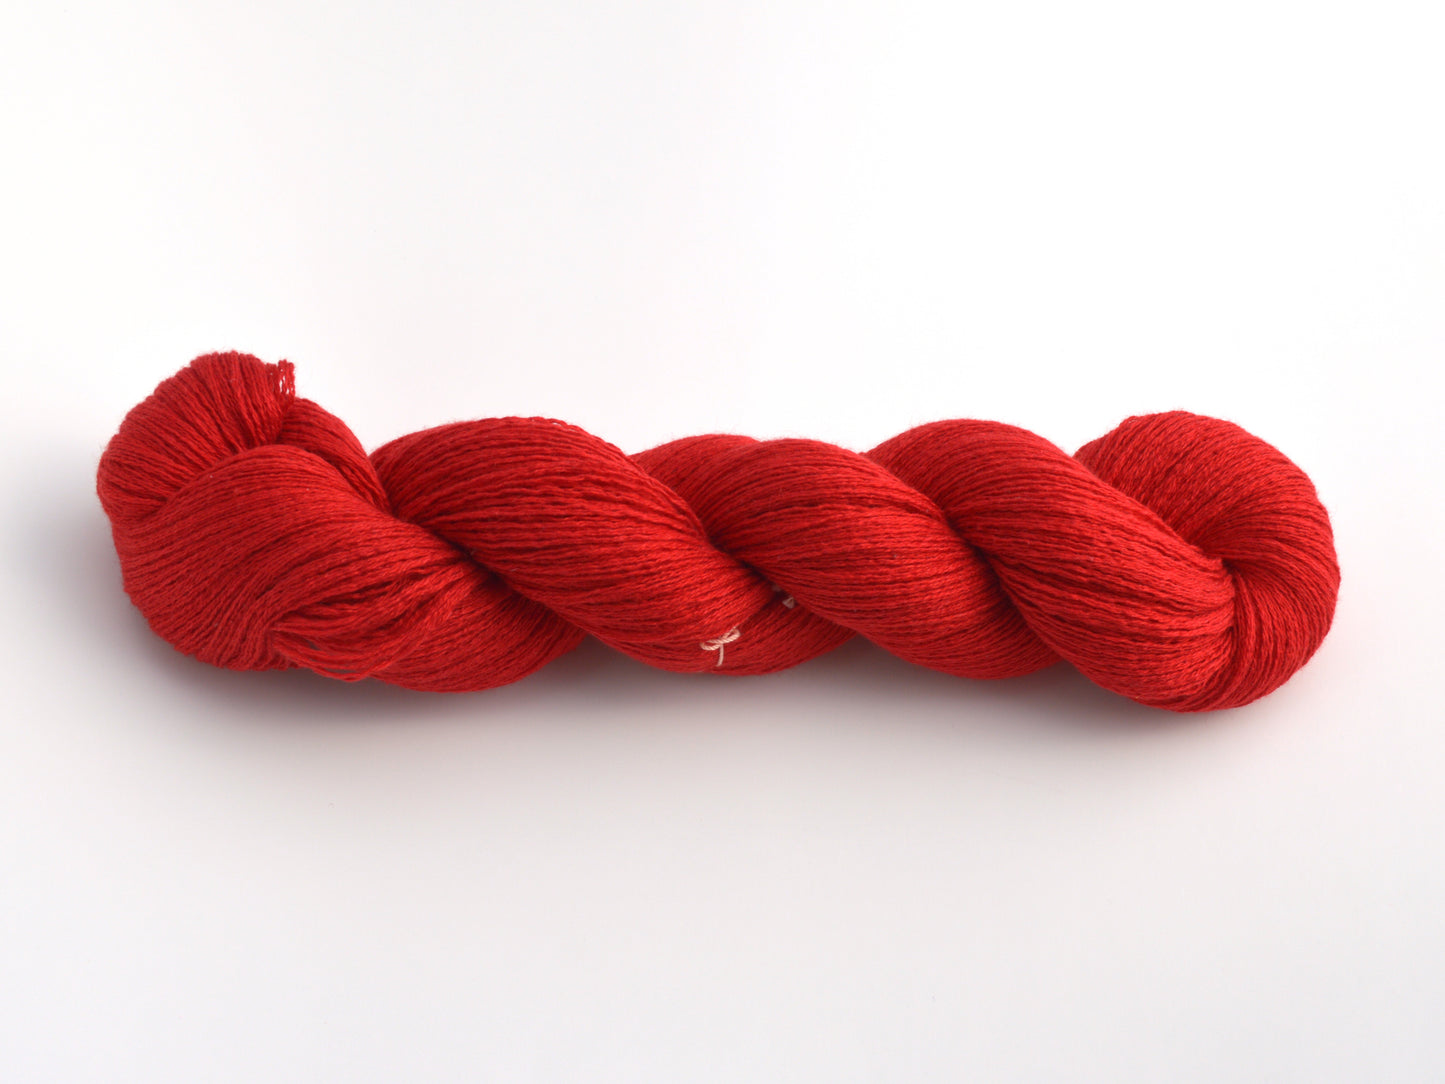 Heavy Lace Weight Recycled Silk Cashmere Yarn in Classic Red